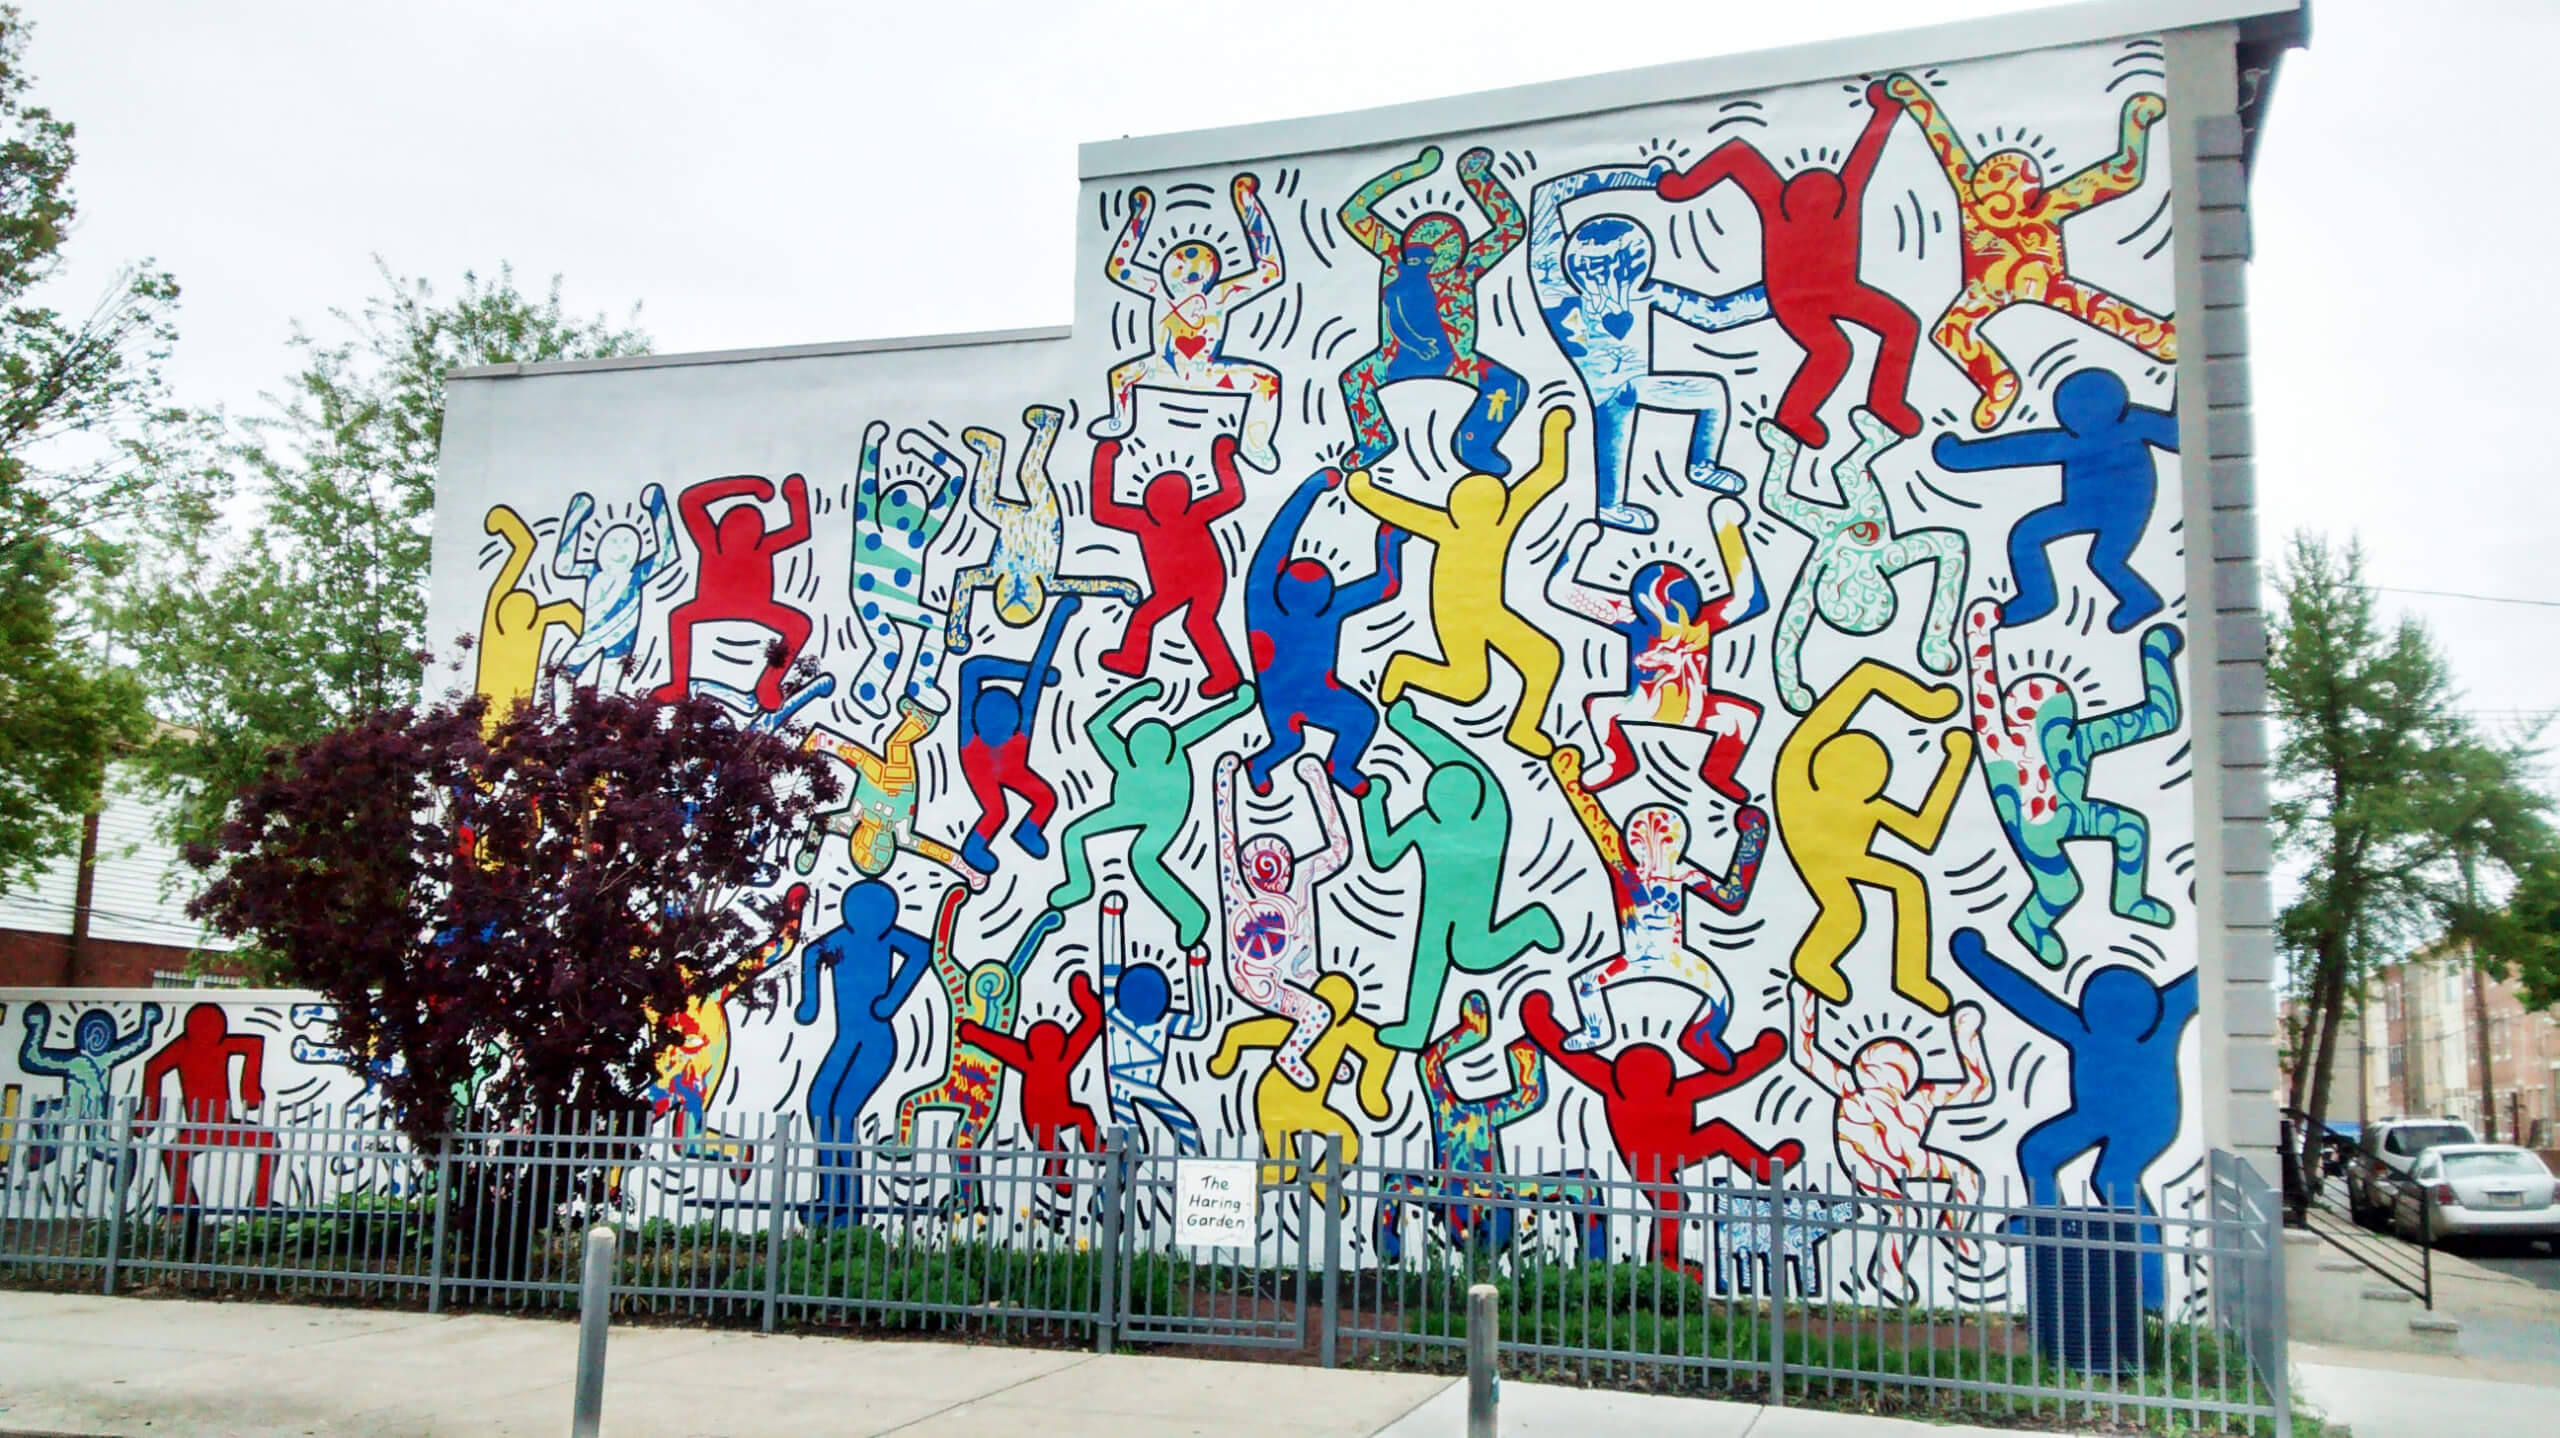 Image 1 Keith Haring We Are The Youth scaled